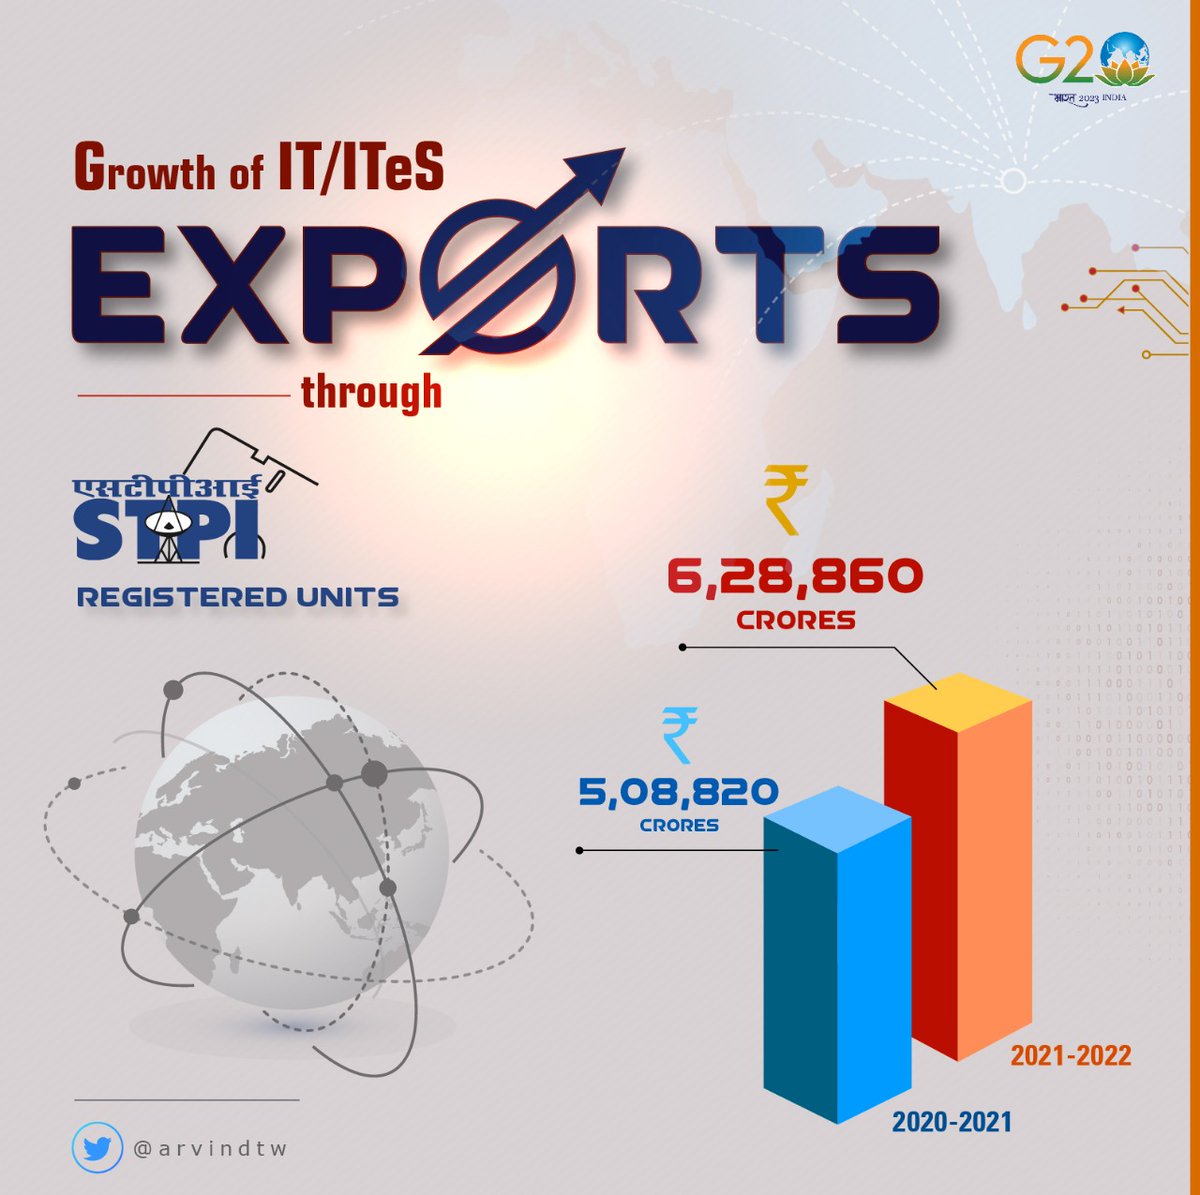 As the IT/ITeS sector is adapting to emerging techs, STPI has also seen a significant growth of 23.59% in software exports from the STPI registered unit in FY 2021-2022 as compared to 8.65% in FY 2020-2021. #GrowWithStpi #GrowWithIndia